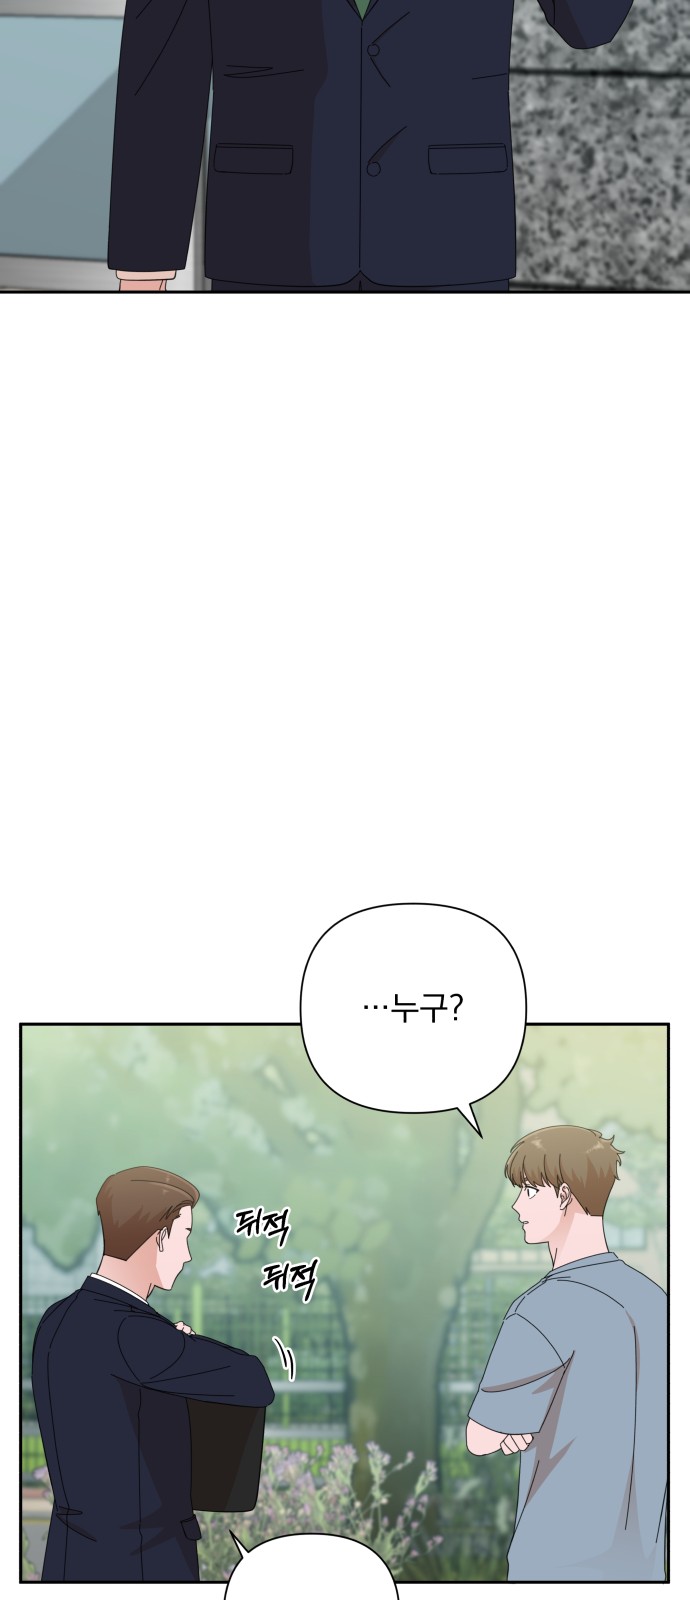 The Man With Pretty Lips - Chapter 40 - Page 3